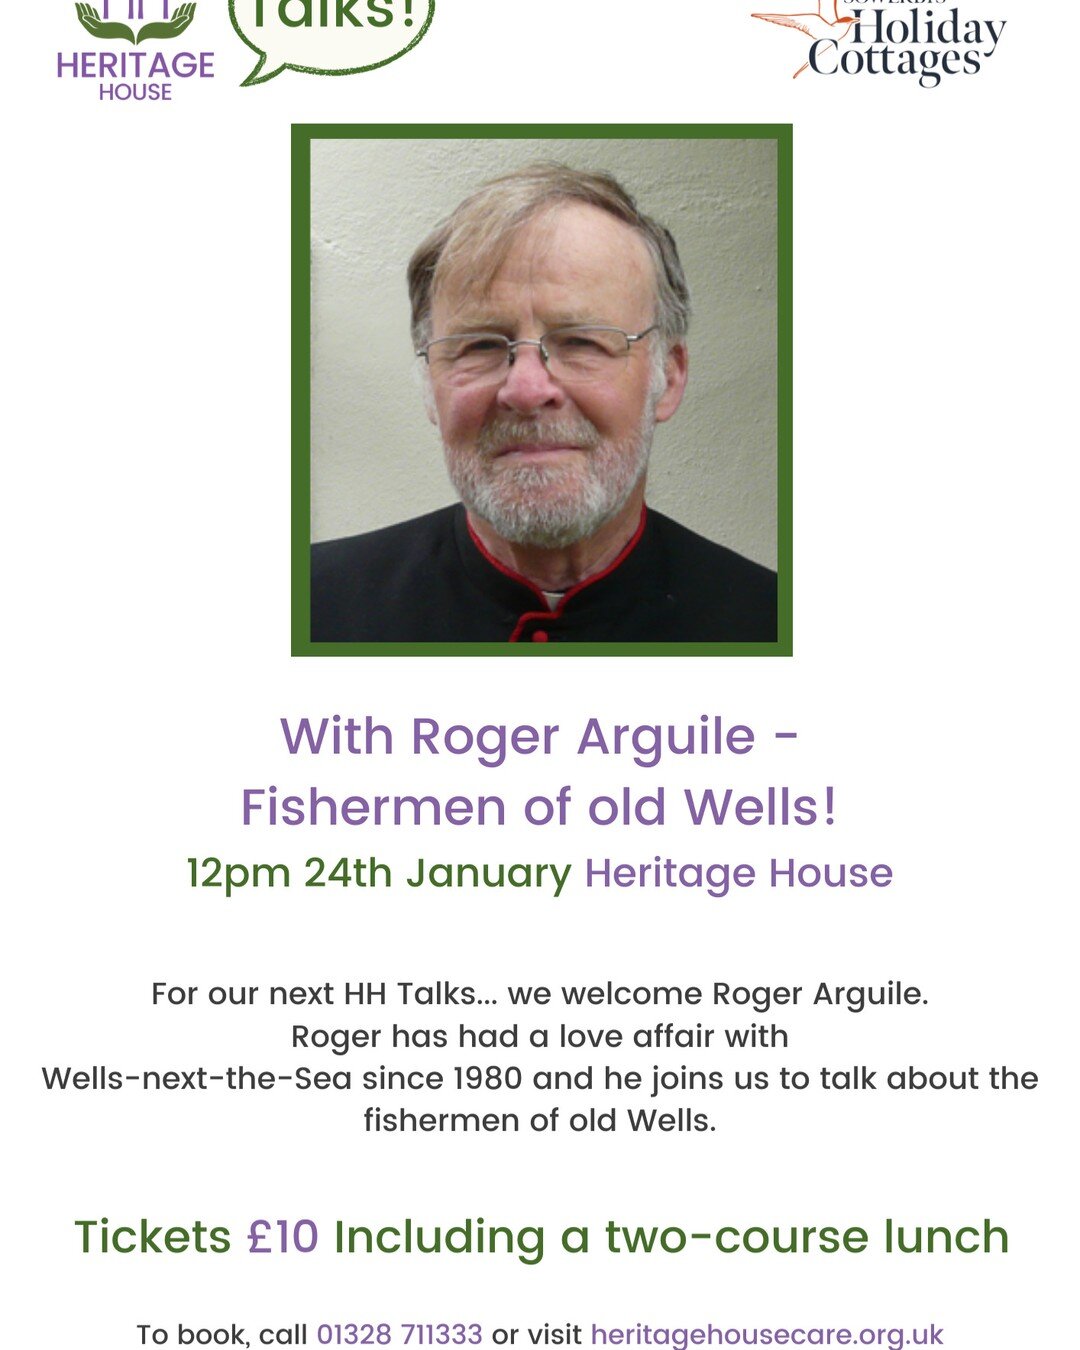 HH Talks... with Roger Arguile about the fishermen of old Wells.
Sales are now live, so head to www.heritagehousecare.org.uk to get your tickets. 
#heritagehousecare #wellsnextthesealife #CarersUK #wellsnextthesea #northnorfolk #HHTalks